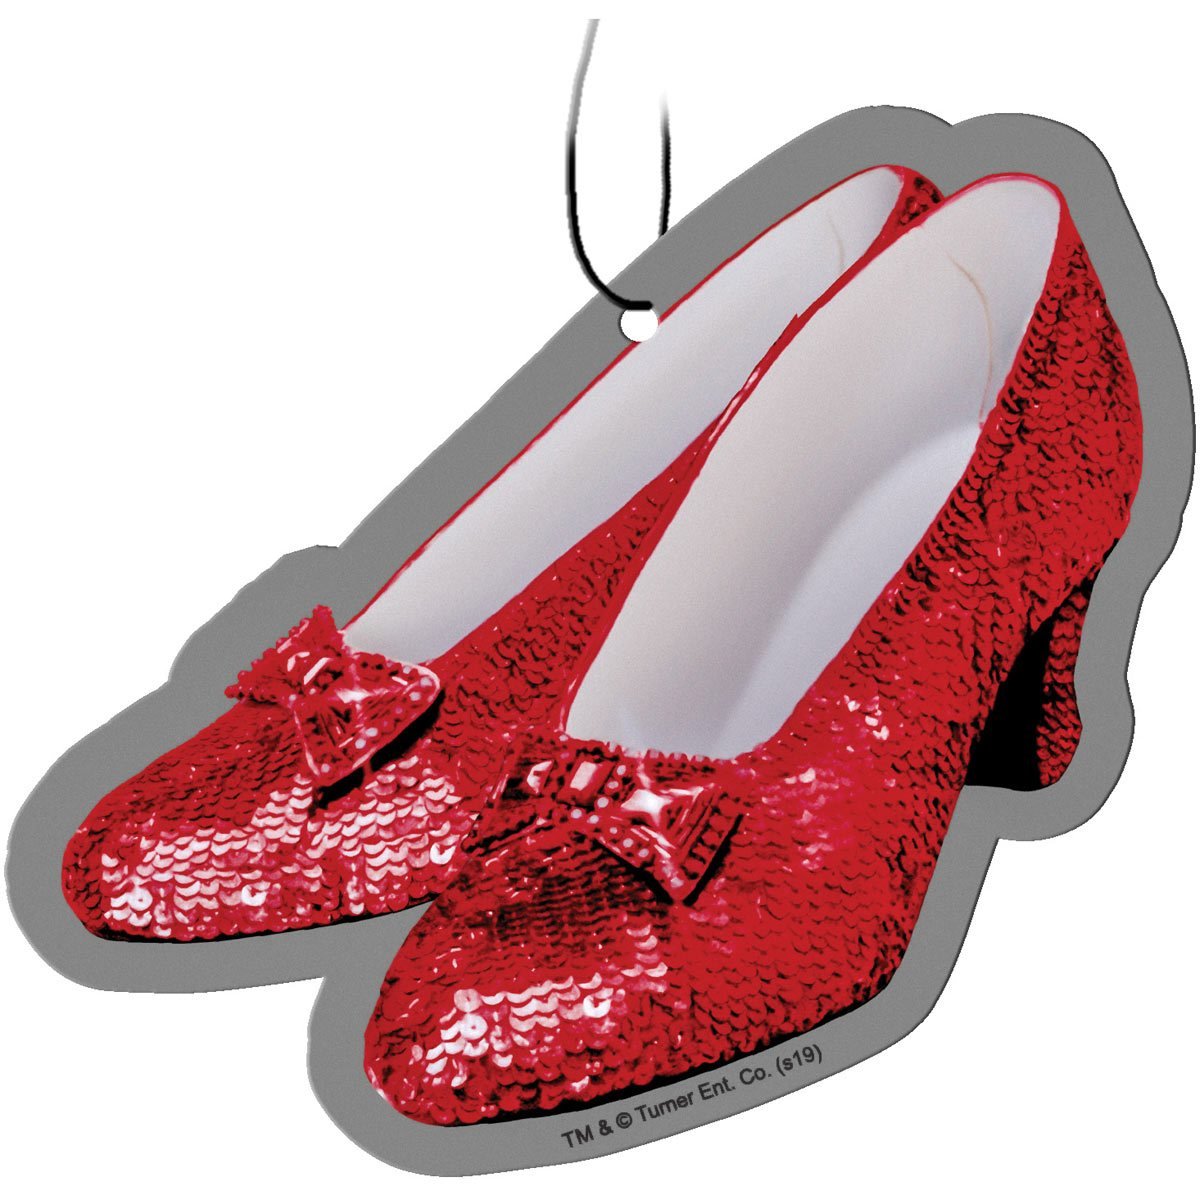 Smithsonian launches Kickstarter for “Wizard of Oz” ruby slippers rehab -  CBS News